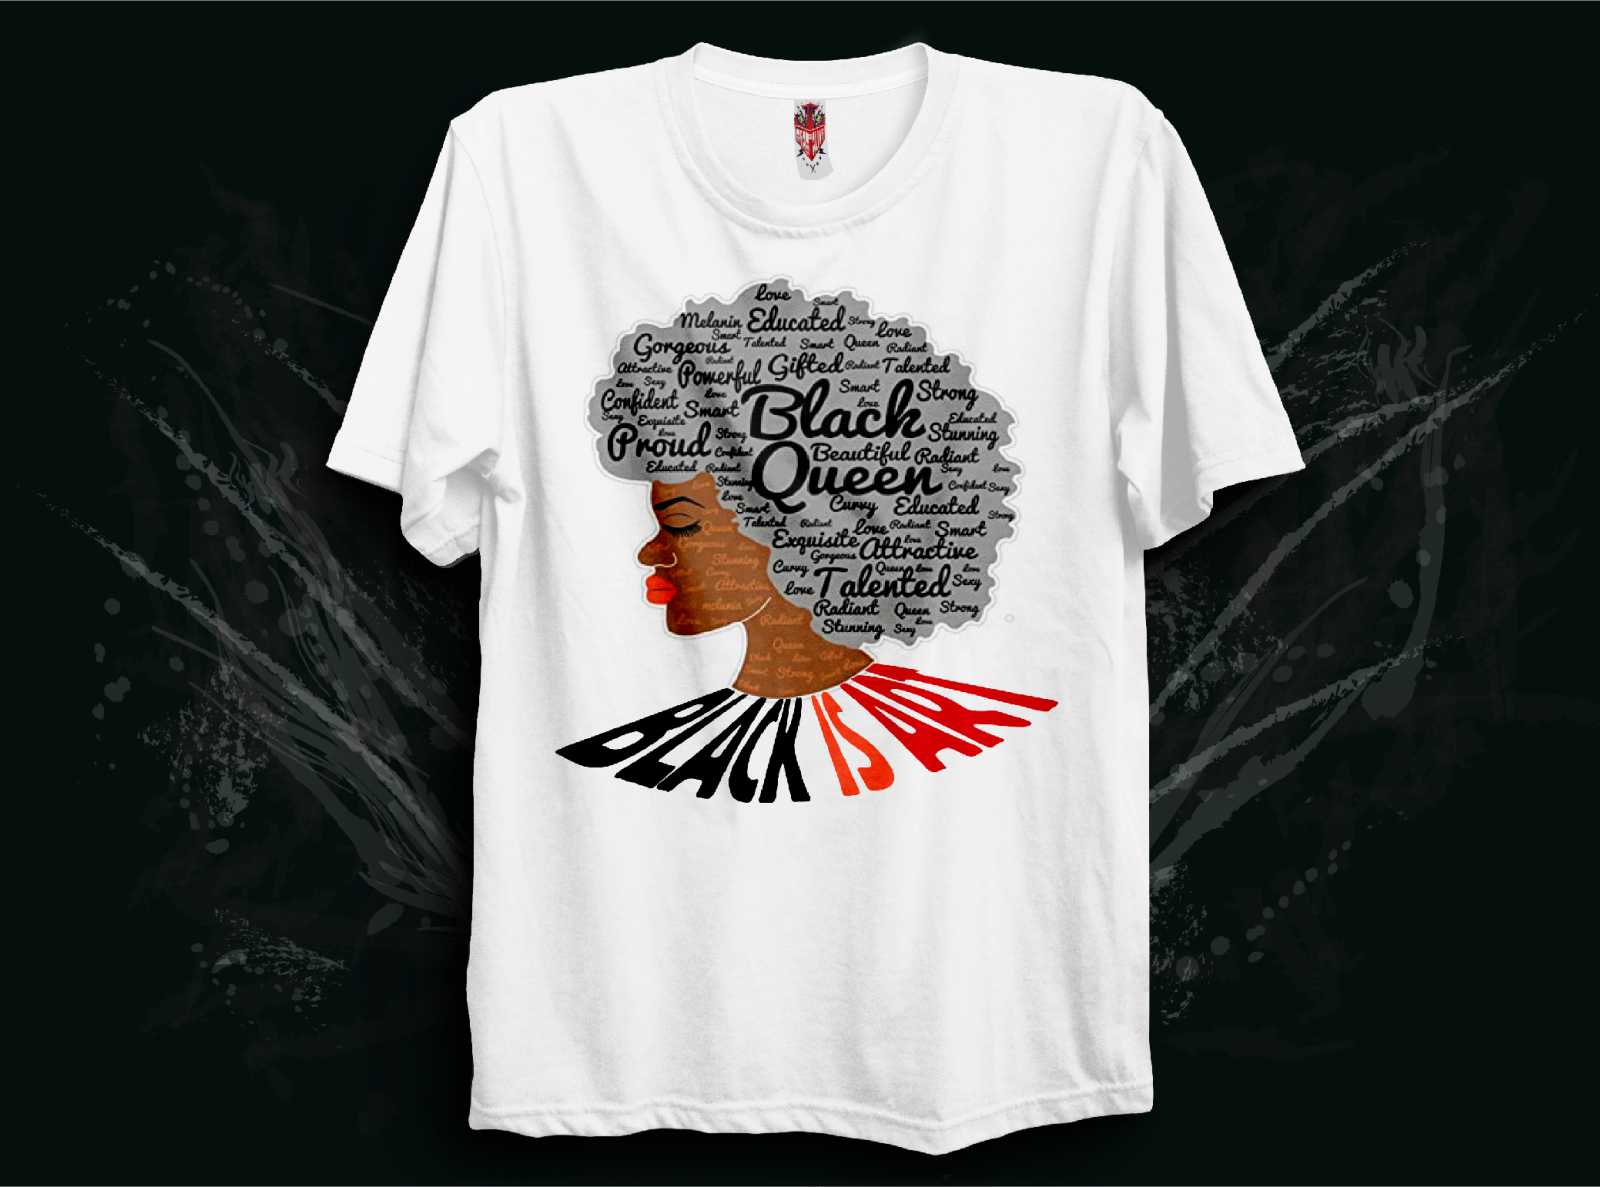 Black Queen by Sizar T-shirt design on Dribbble